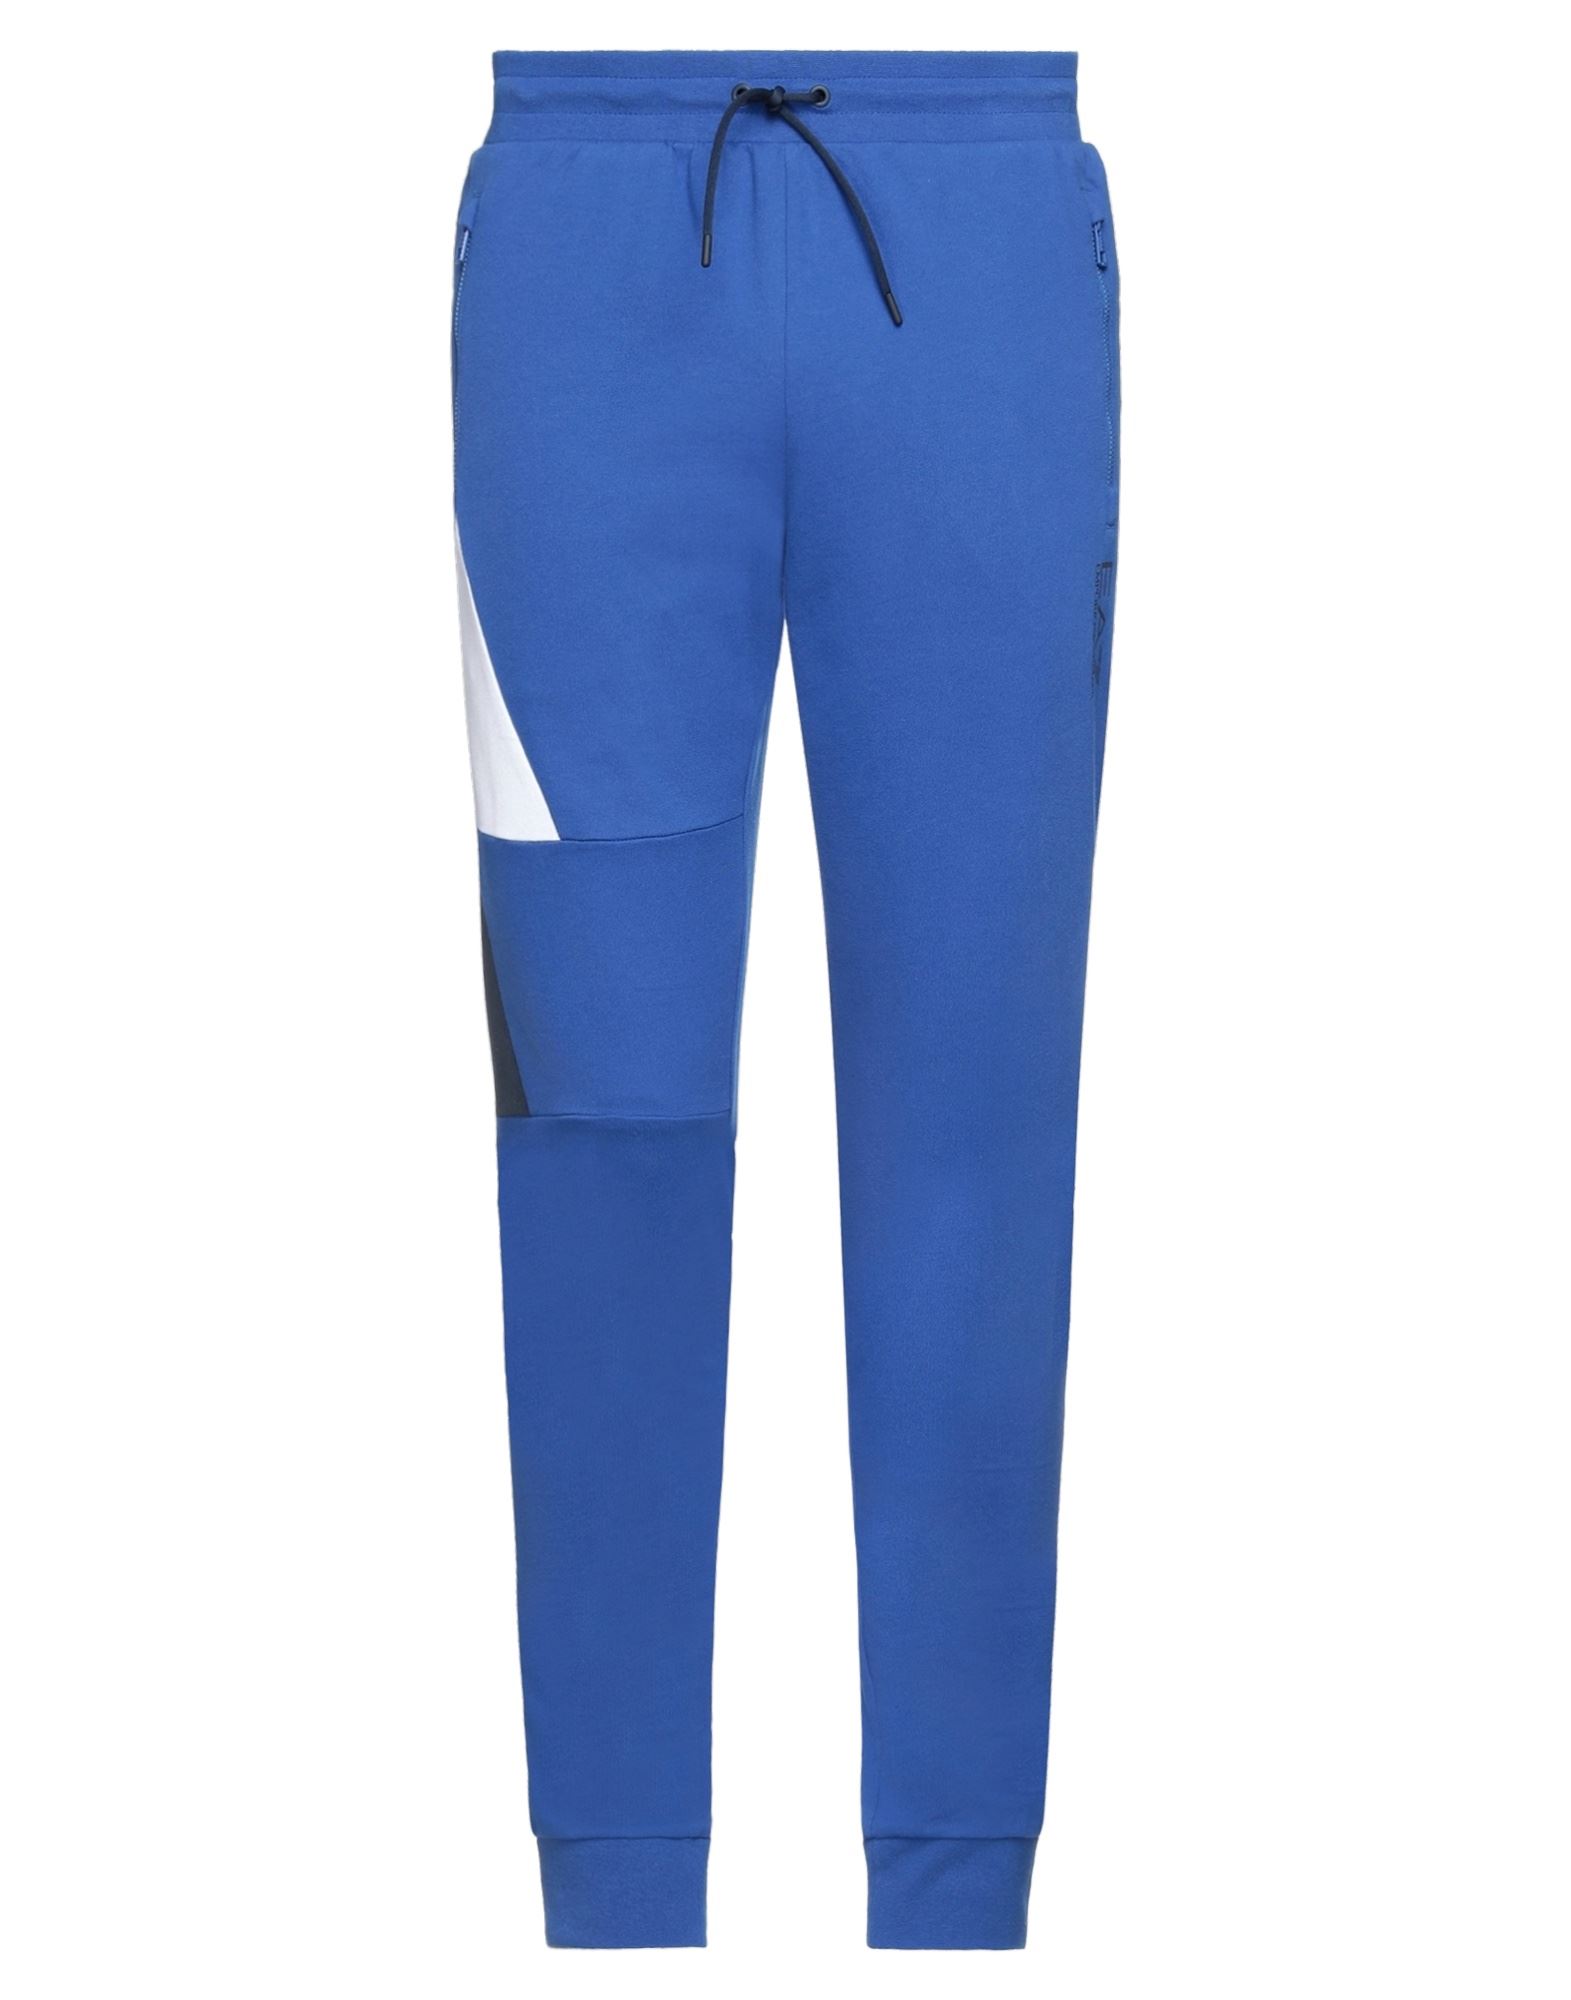 Ea7 Pants In Bright Blue